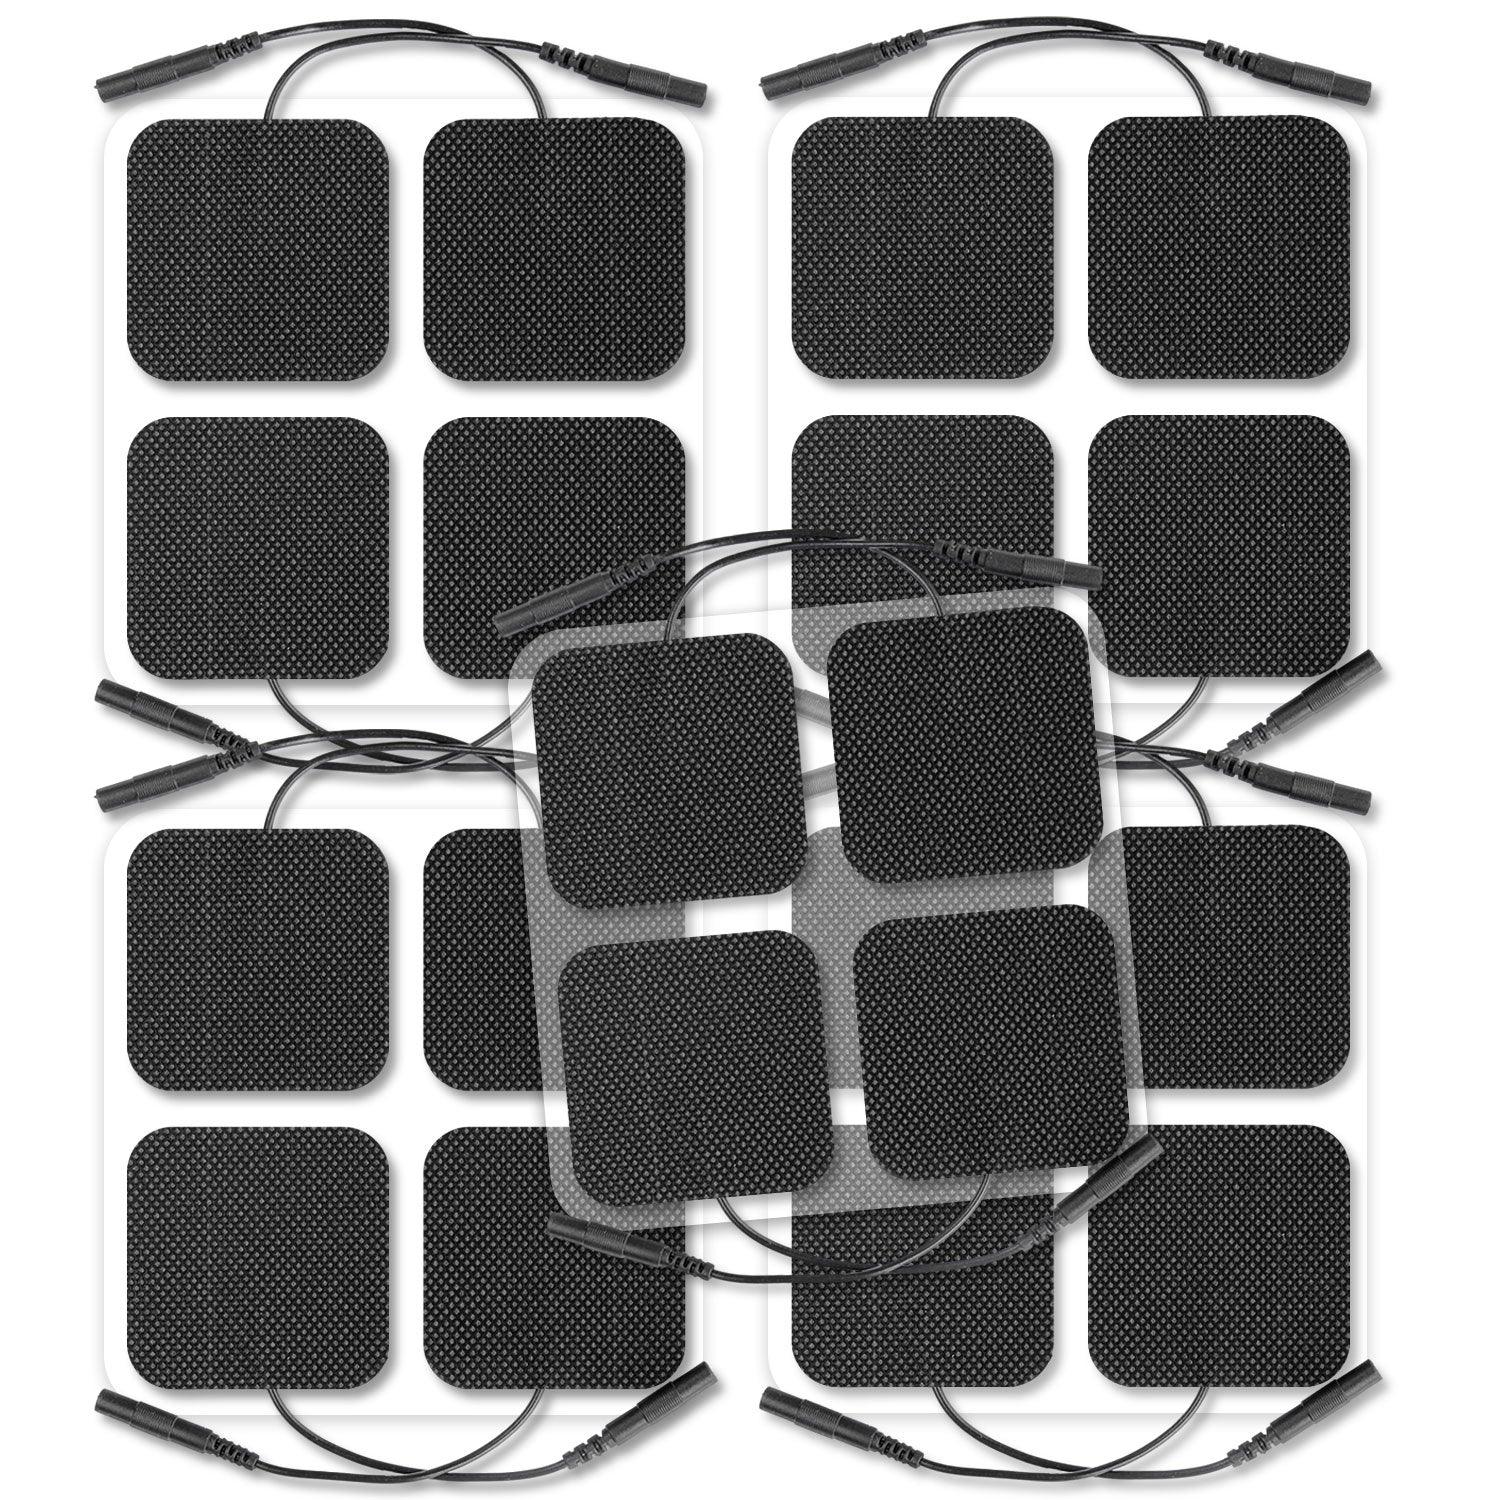 AUVON TENS Unit Pads 2"X2" 20 Pcs, 3rd Gen Latex-Free Replacement Pads Electrode Patches with Upgraded Self-Stick Performance and Non-Irritating Design for Electrotherapy - AUVON